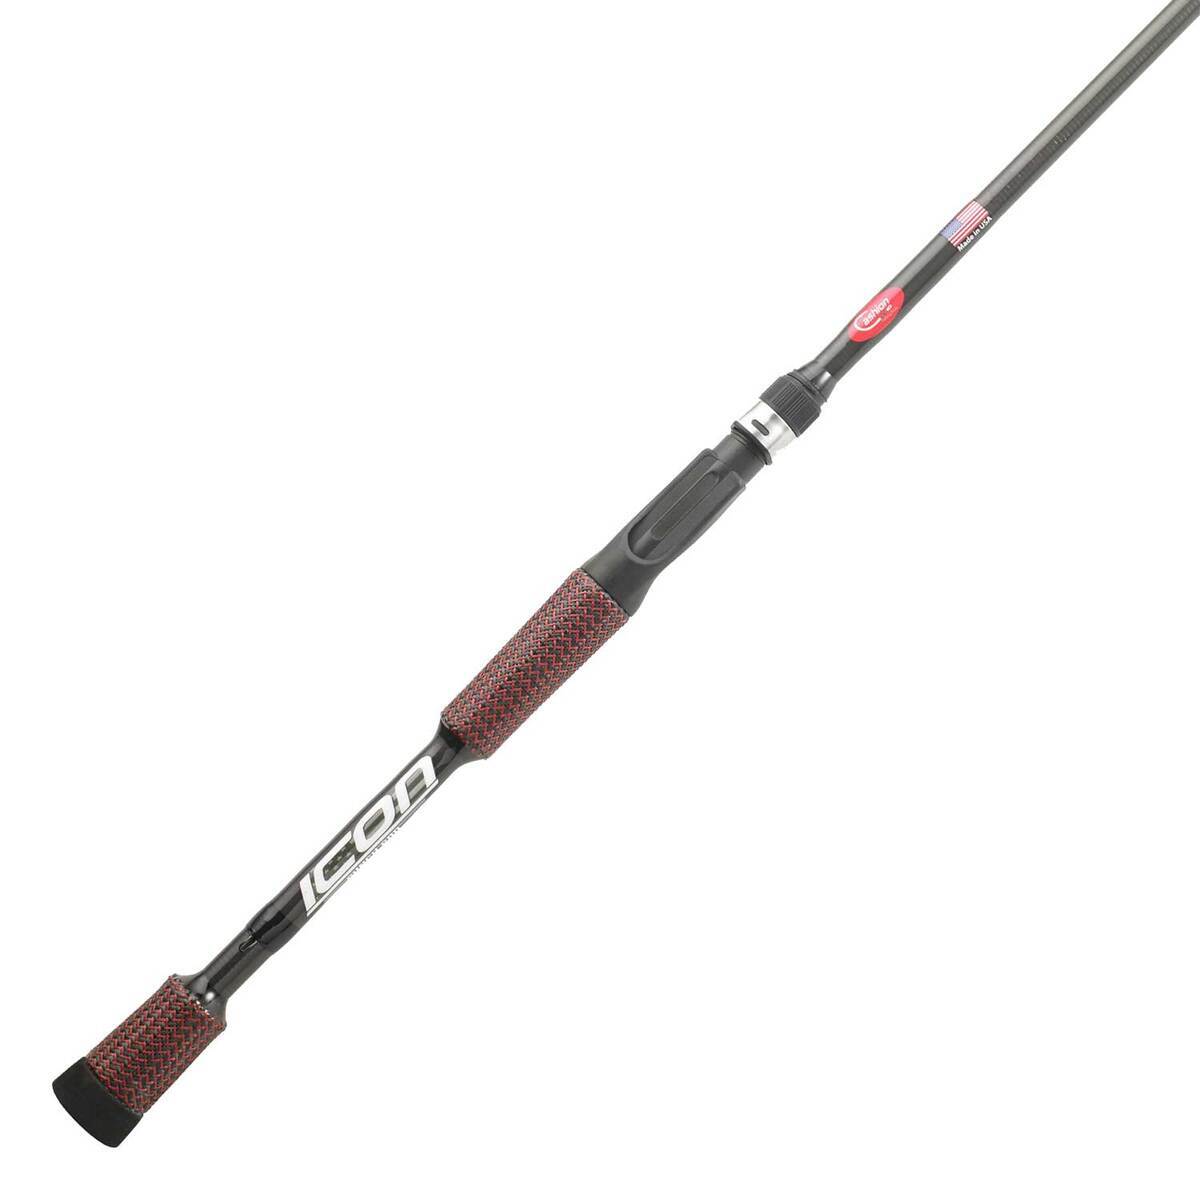 Cashion Fishing Rods John Crews ICON Punch Casting Rod - 7ft 10in